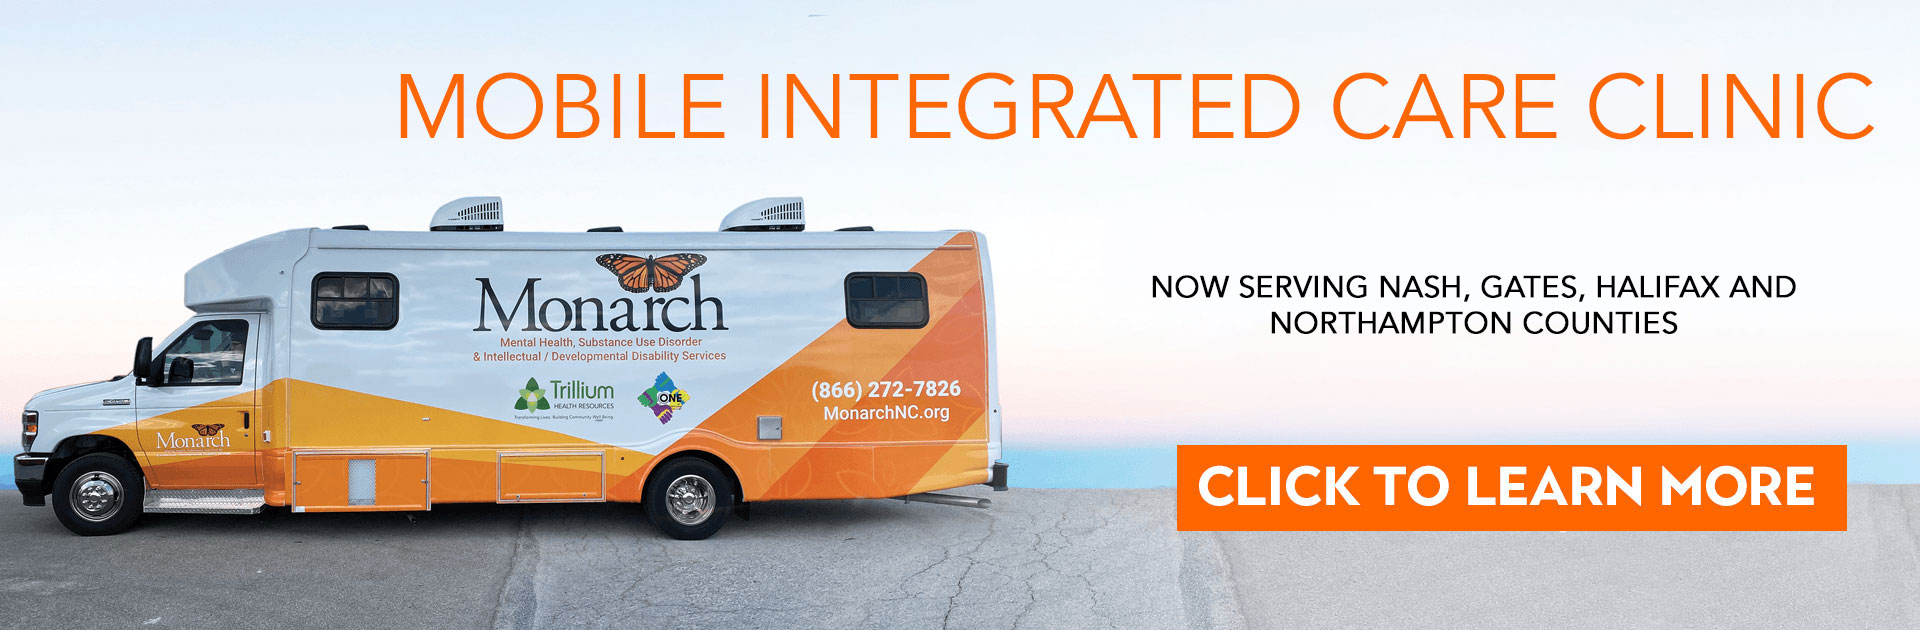 Mobile Integrated Care Clinic